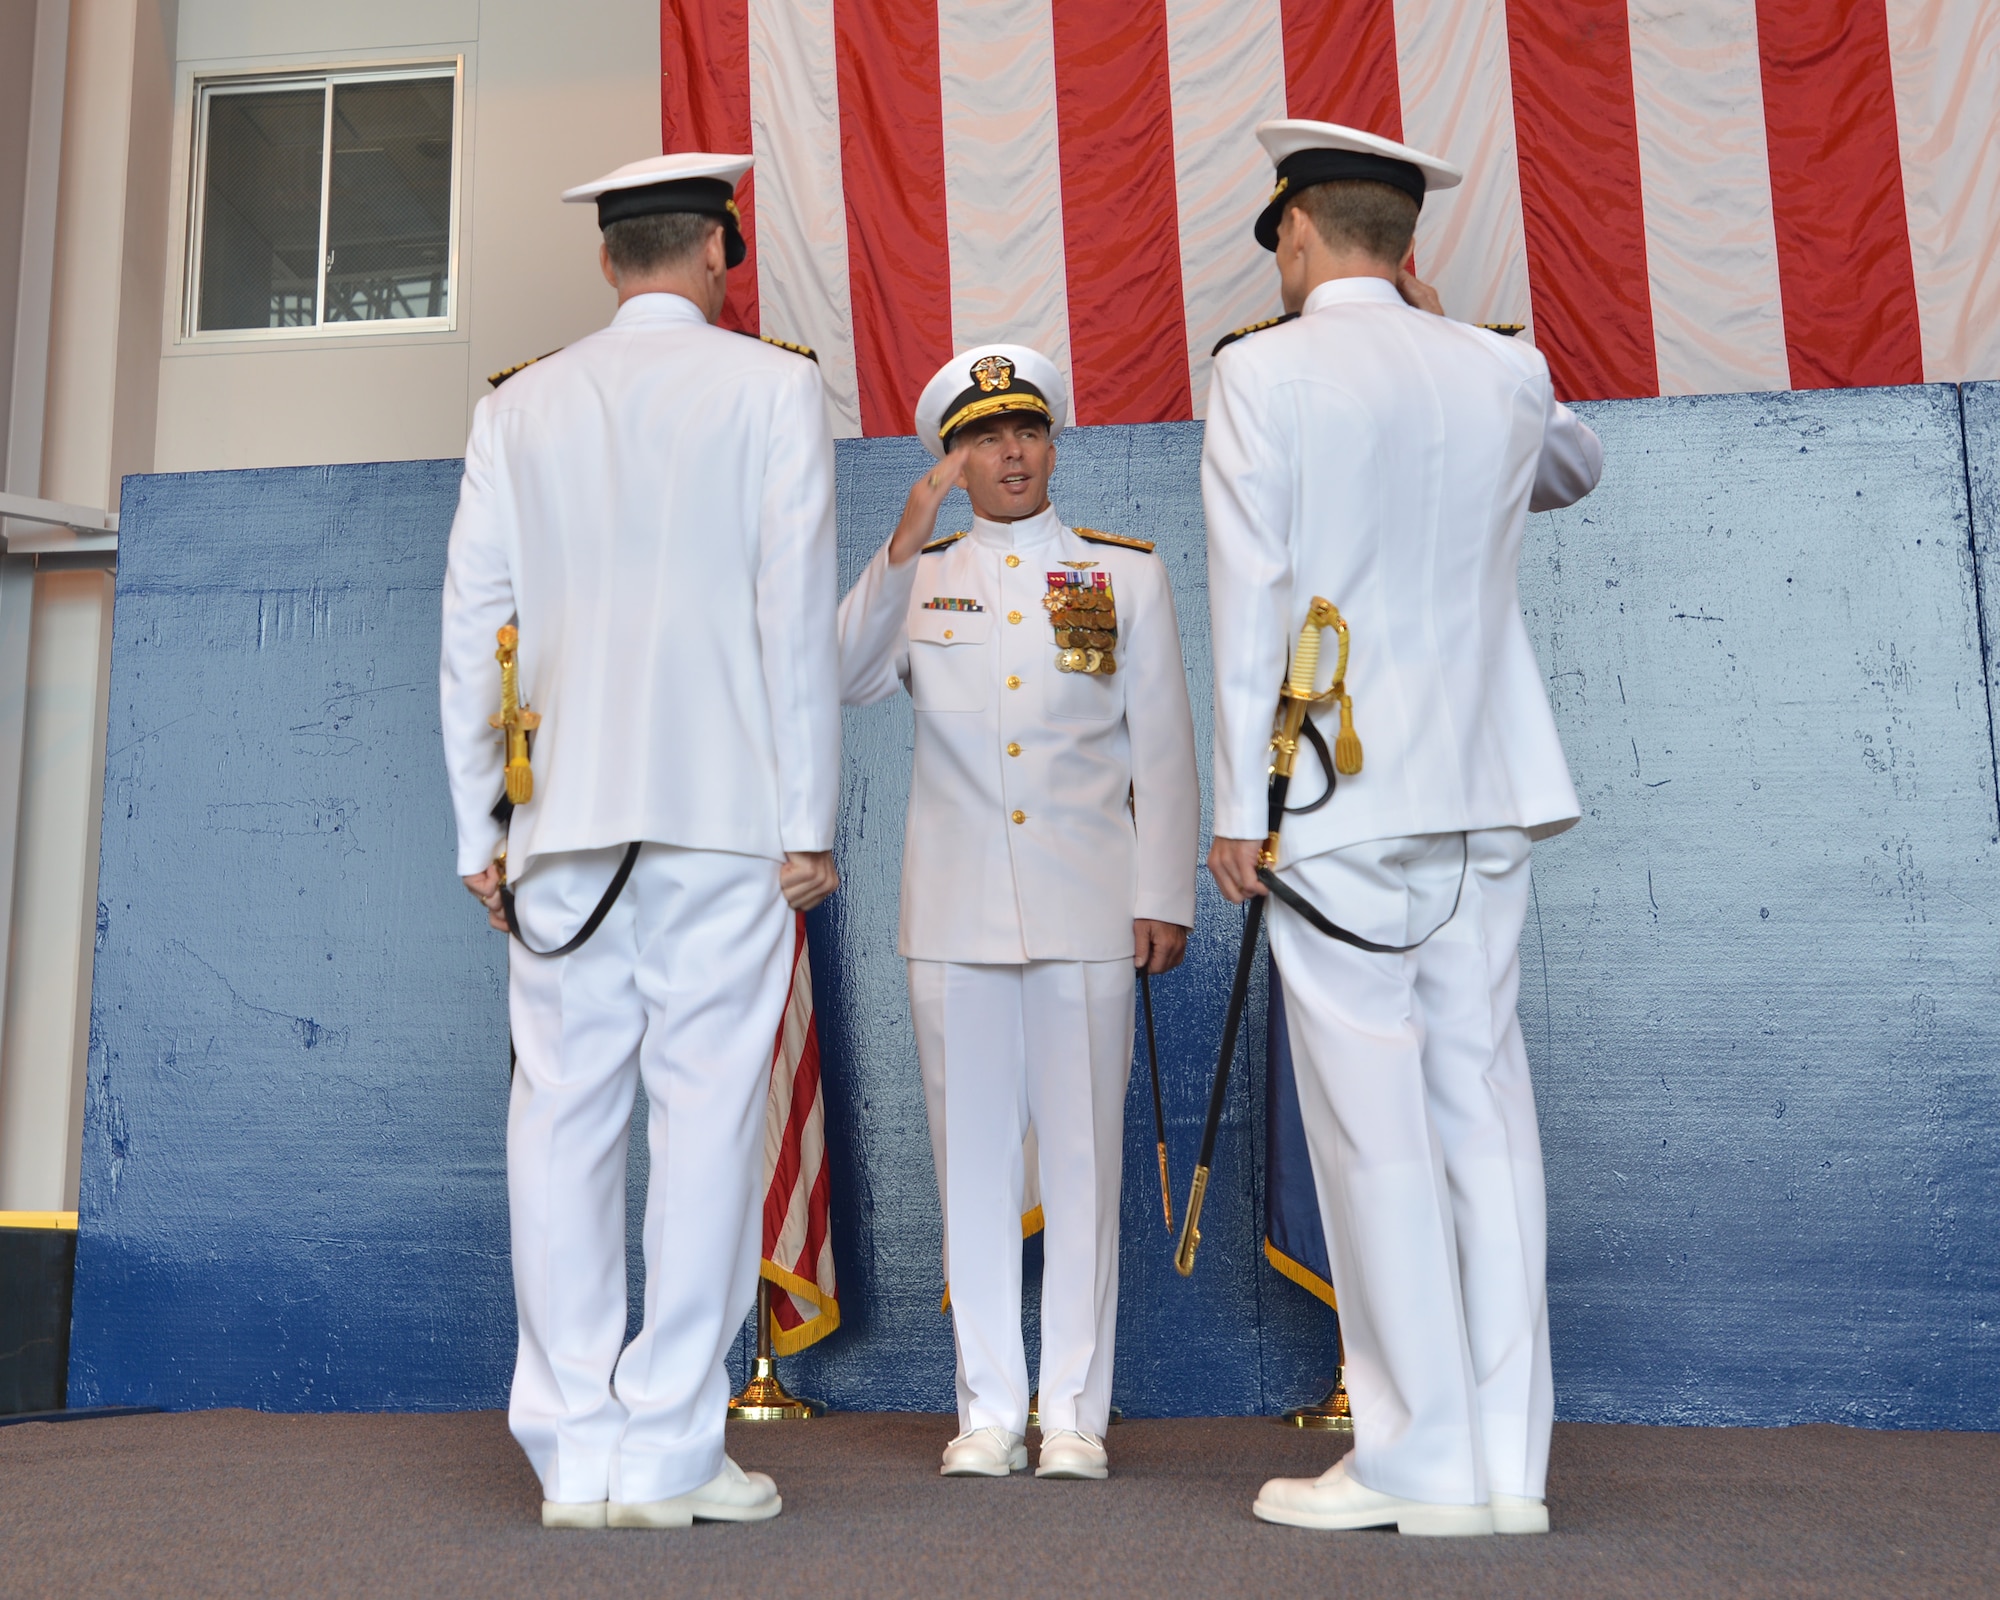 Rear Adm. Terry Kraft, center, U.S. Naval Forces Japan commander, returns a salute from Capt. Keith Henry, right, originally from Cheshire, Connecticut, during the Naval Air Facility (NAF) Misawa Change of Command Ceremony, June 20, 2014.  Henry assumed command of NAF Misawa from Capt. Chris Rodeman, becoming the 18th commanding officer in installation history. NAF Misawa is a U.S. naval base located in northern Japan. (U.S. Navy photo by Mass Communication Specialist 3rd Class Erin Devenberg/Released)